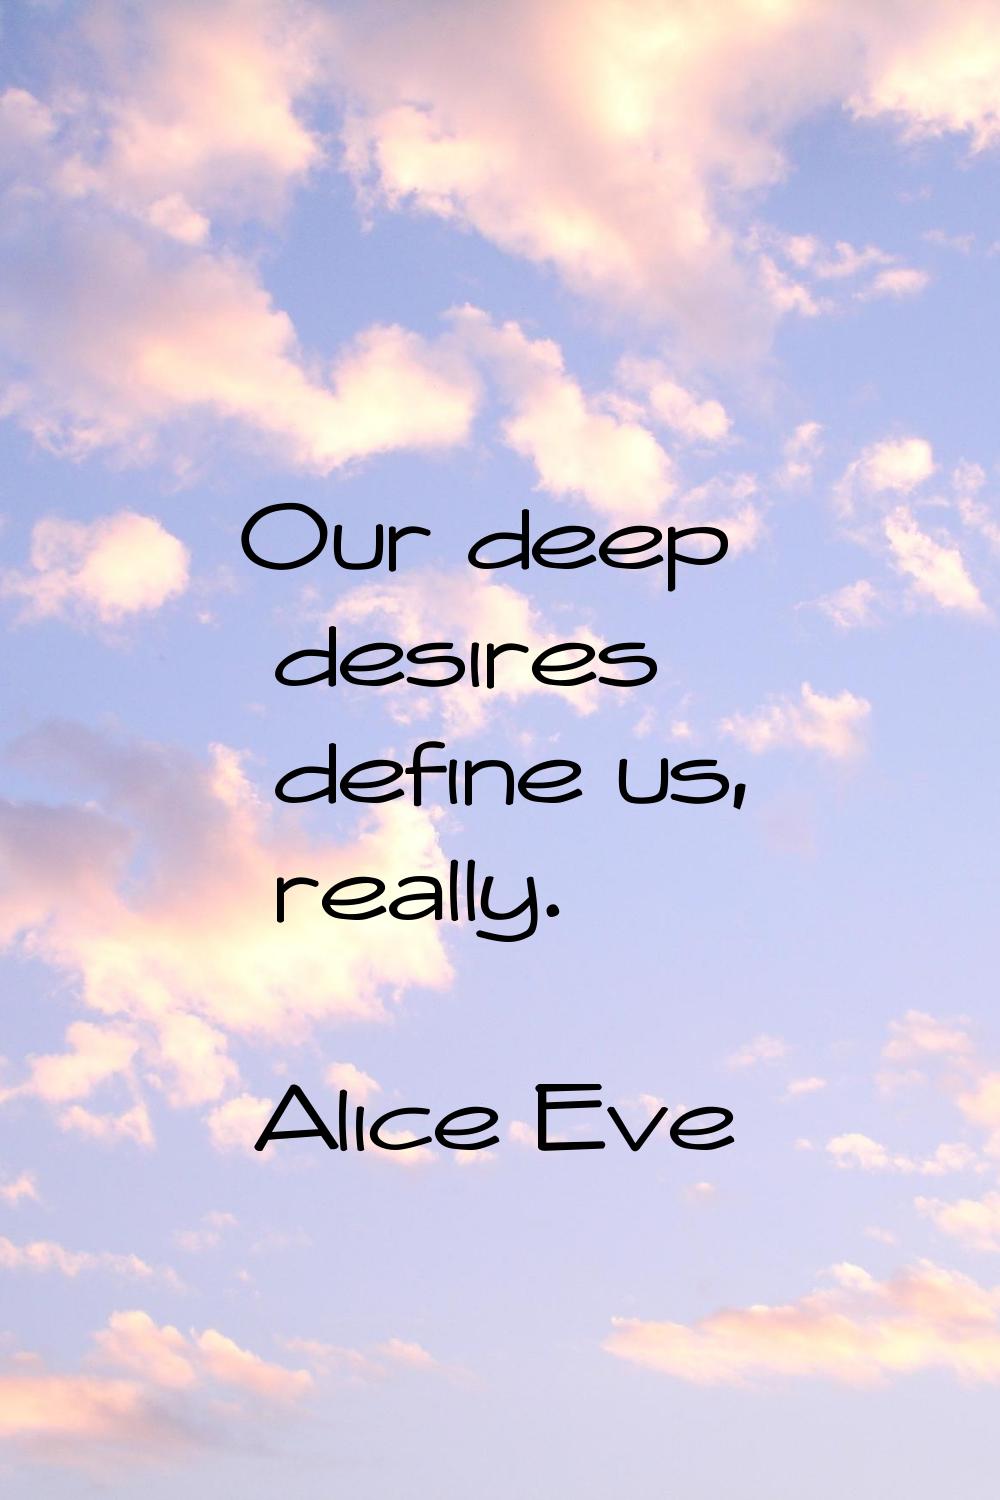 Our deep desires define us, really.